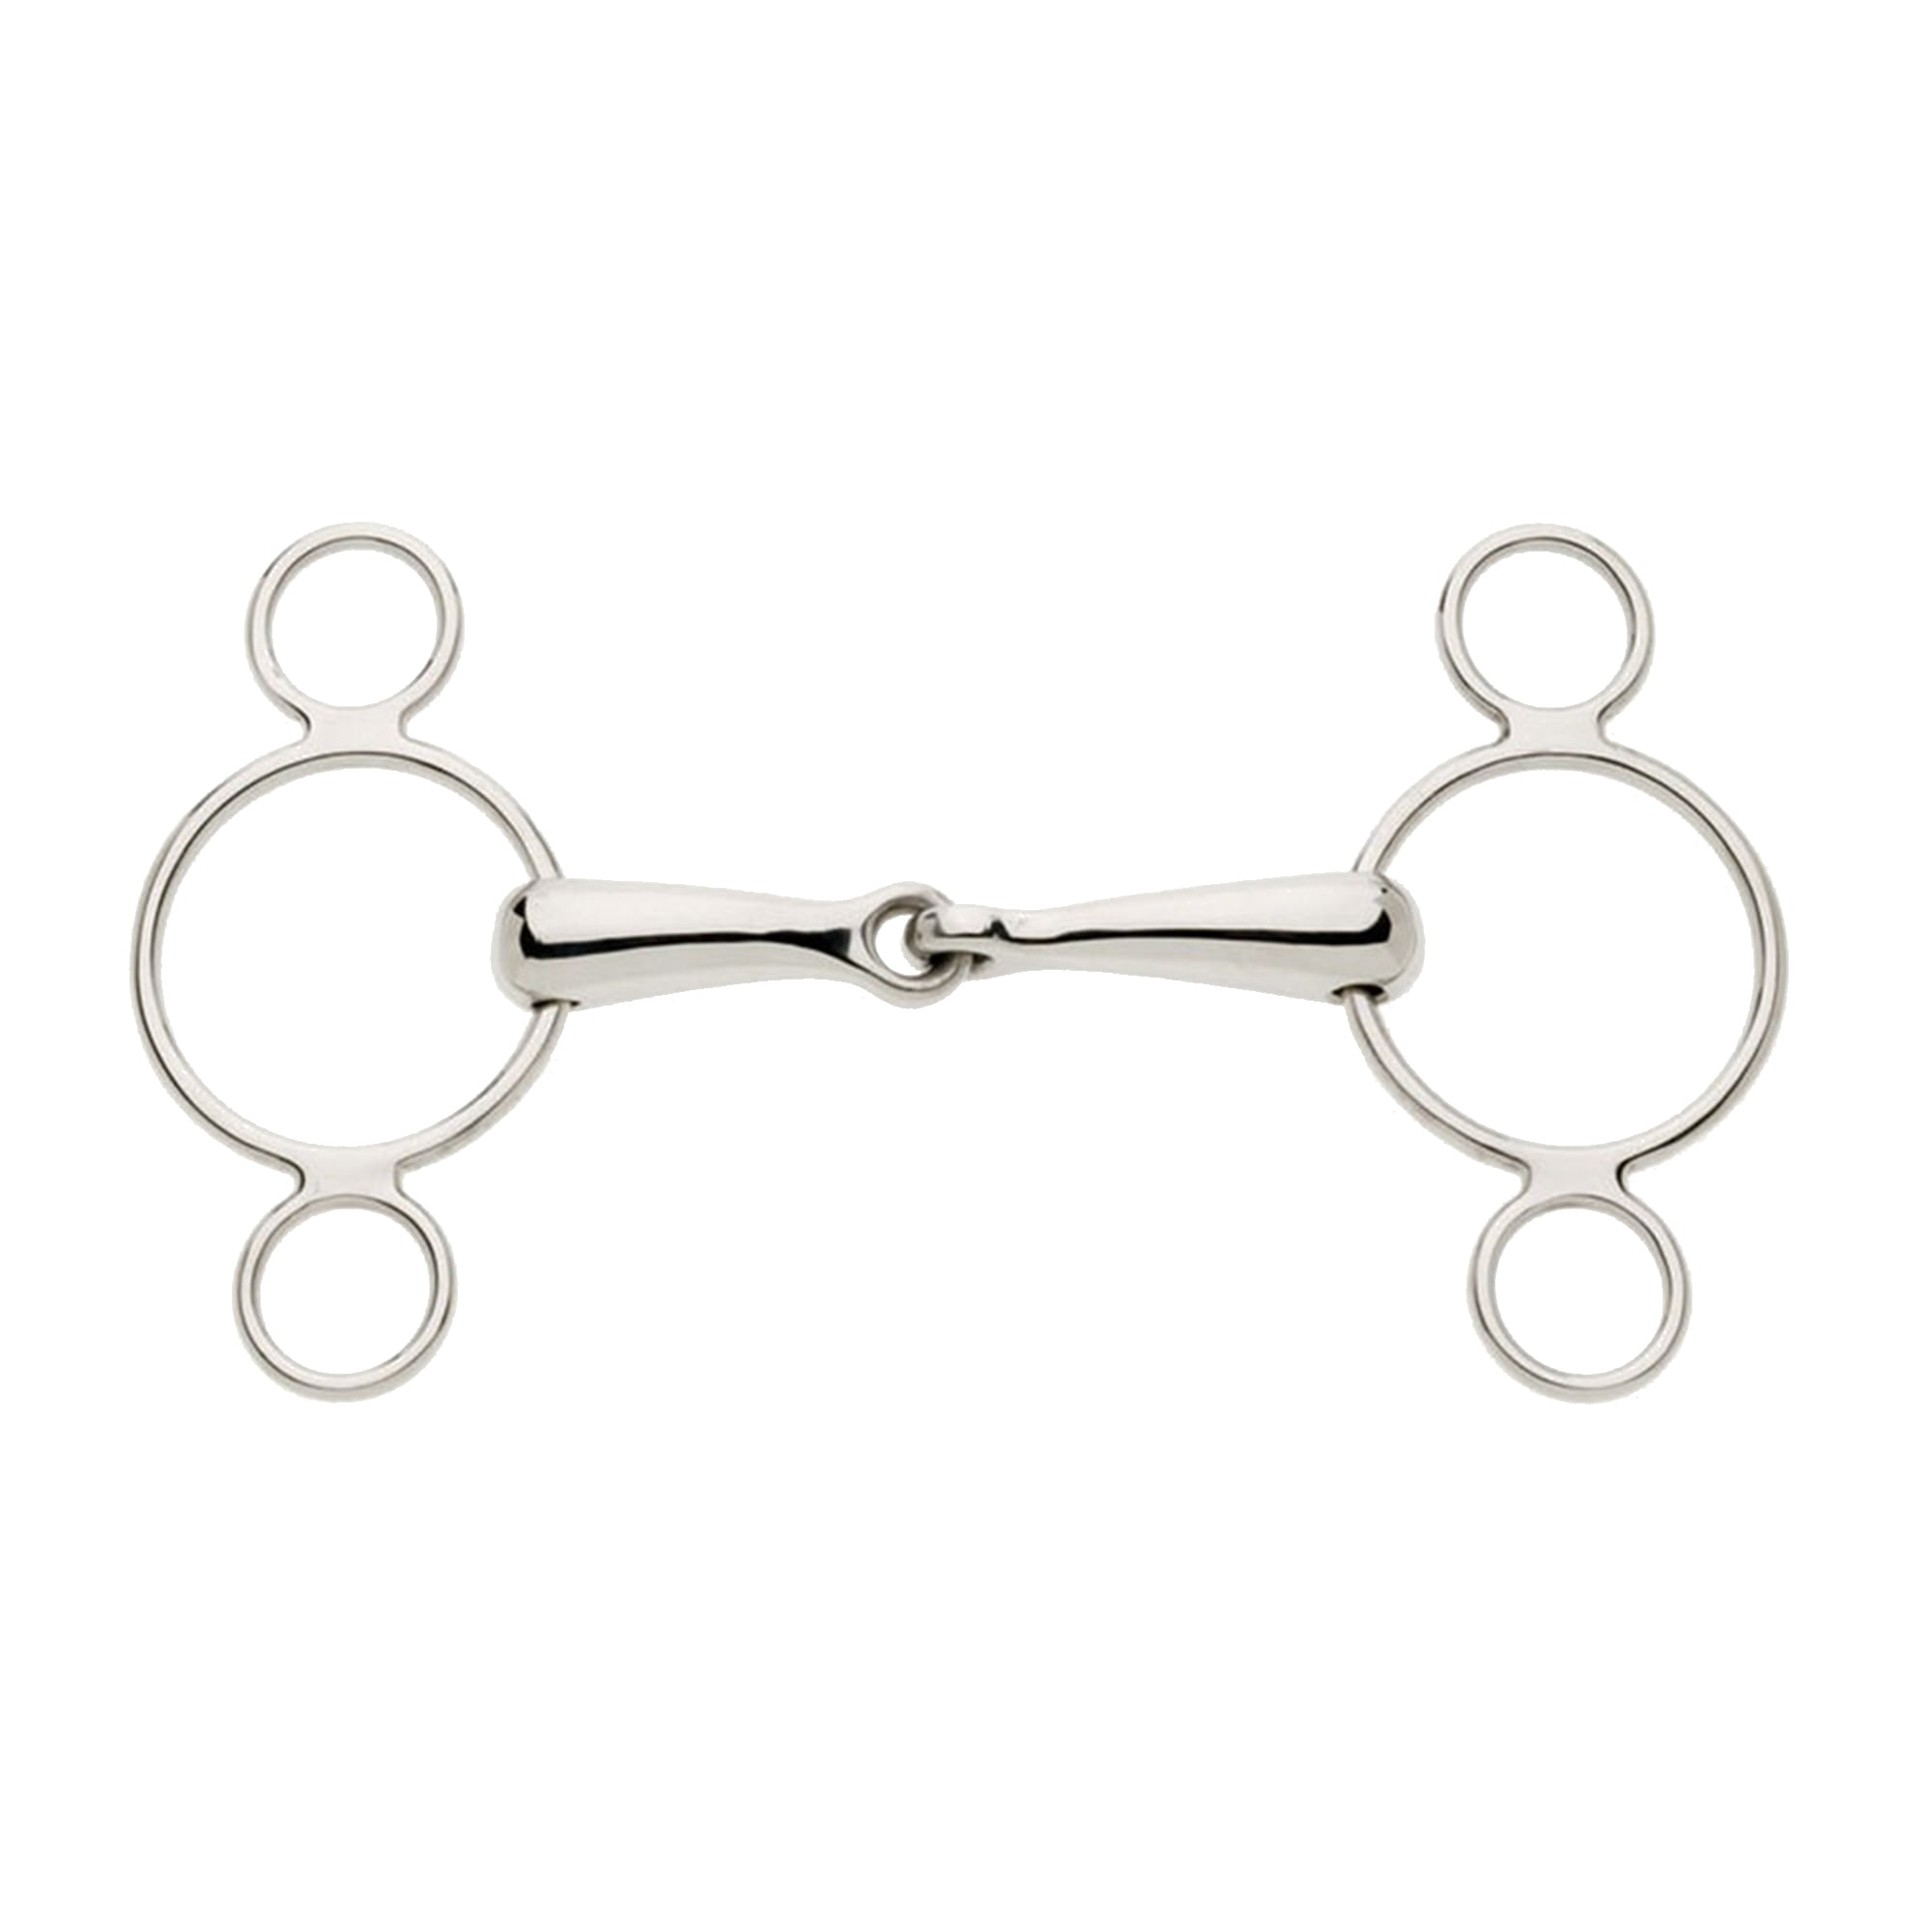 Lorina Continental 2 Ring Single Jointed Continental Dutch Gag Bubble Bit 4.5-6